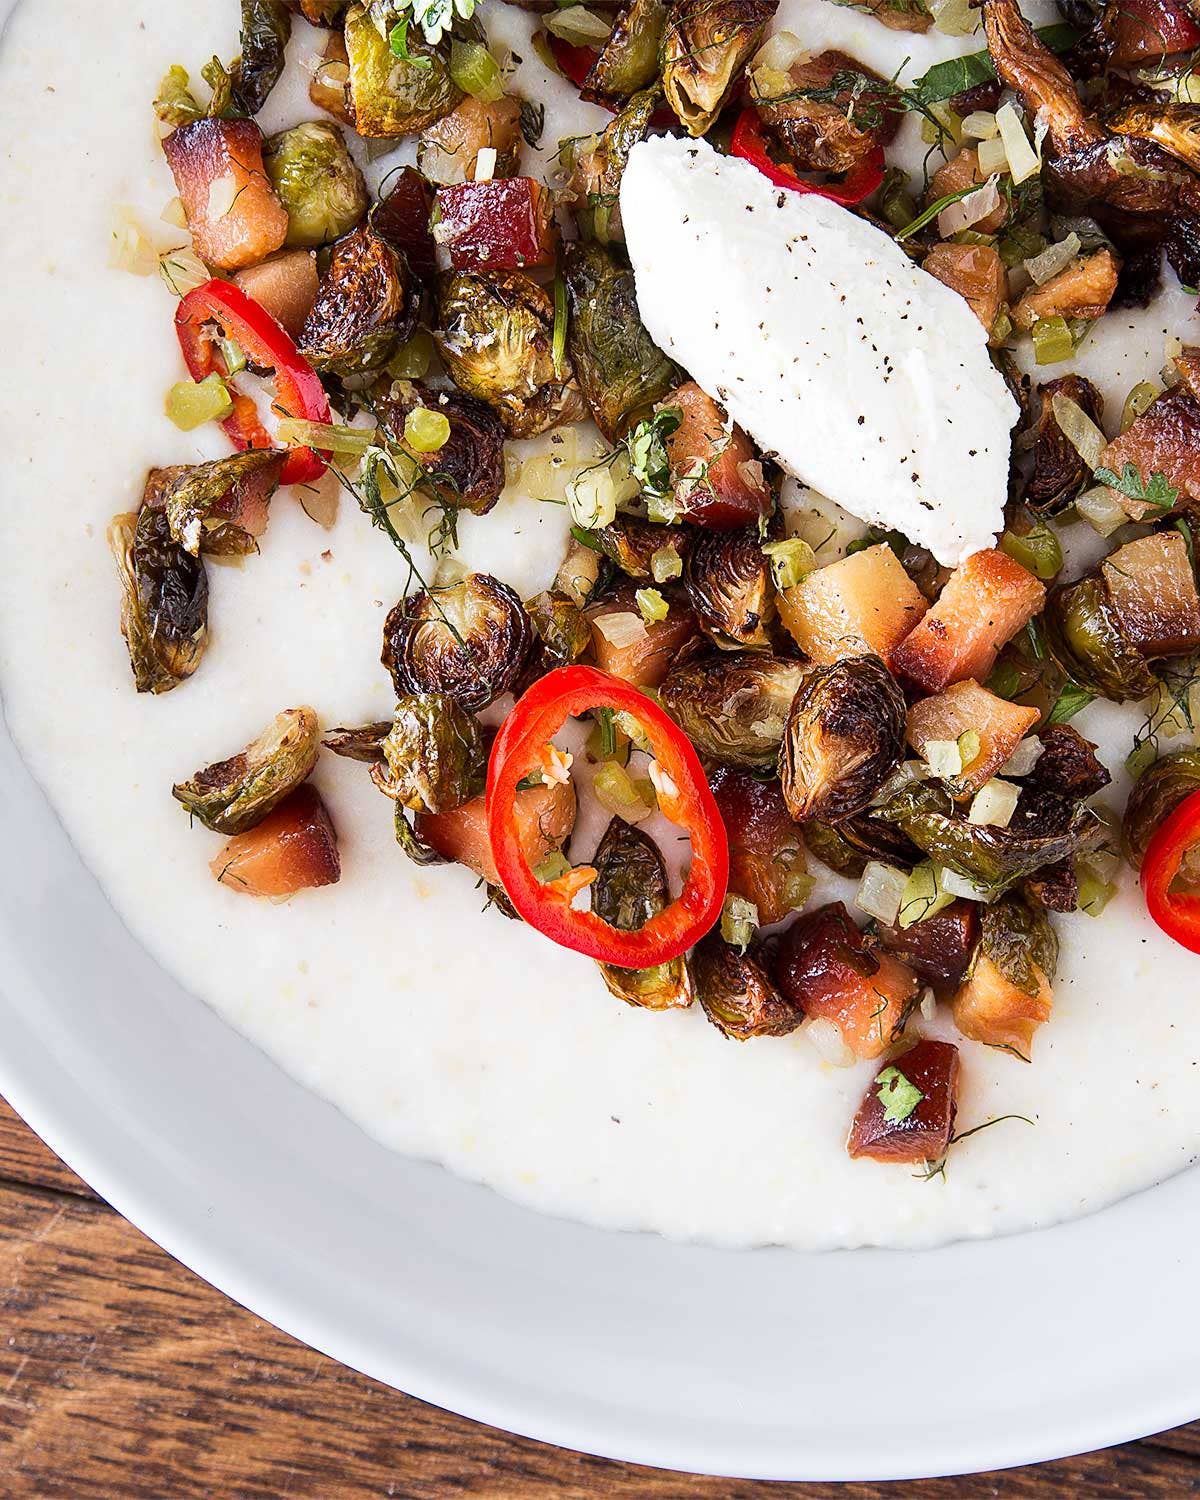 Grits with Brussels Sprouts, Quince, and Goats’ Milk Curd